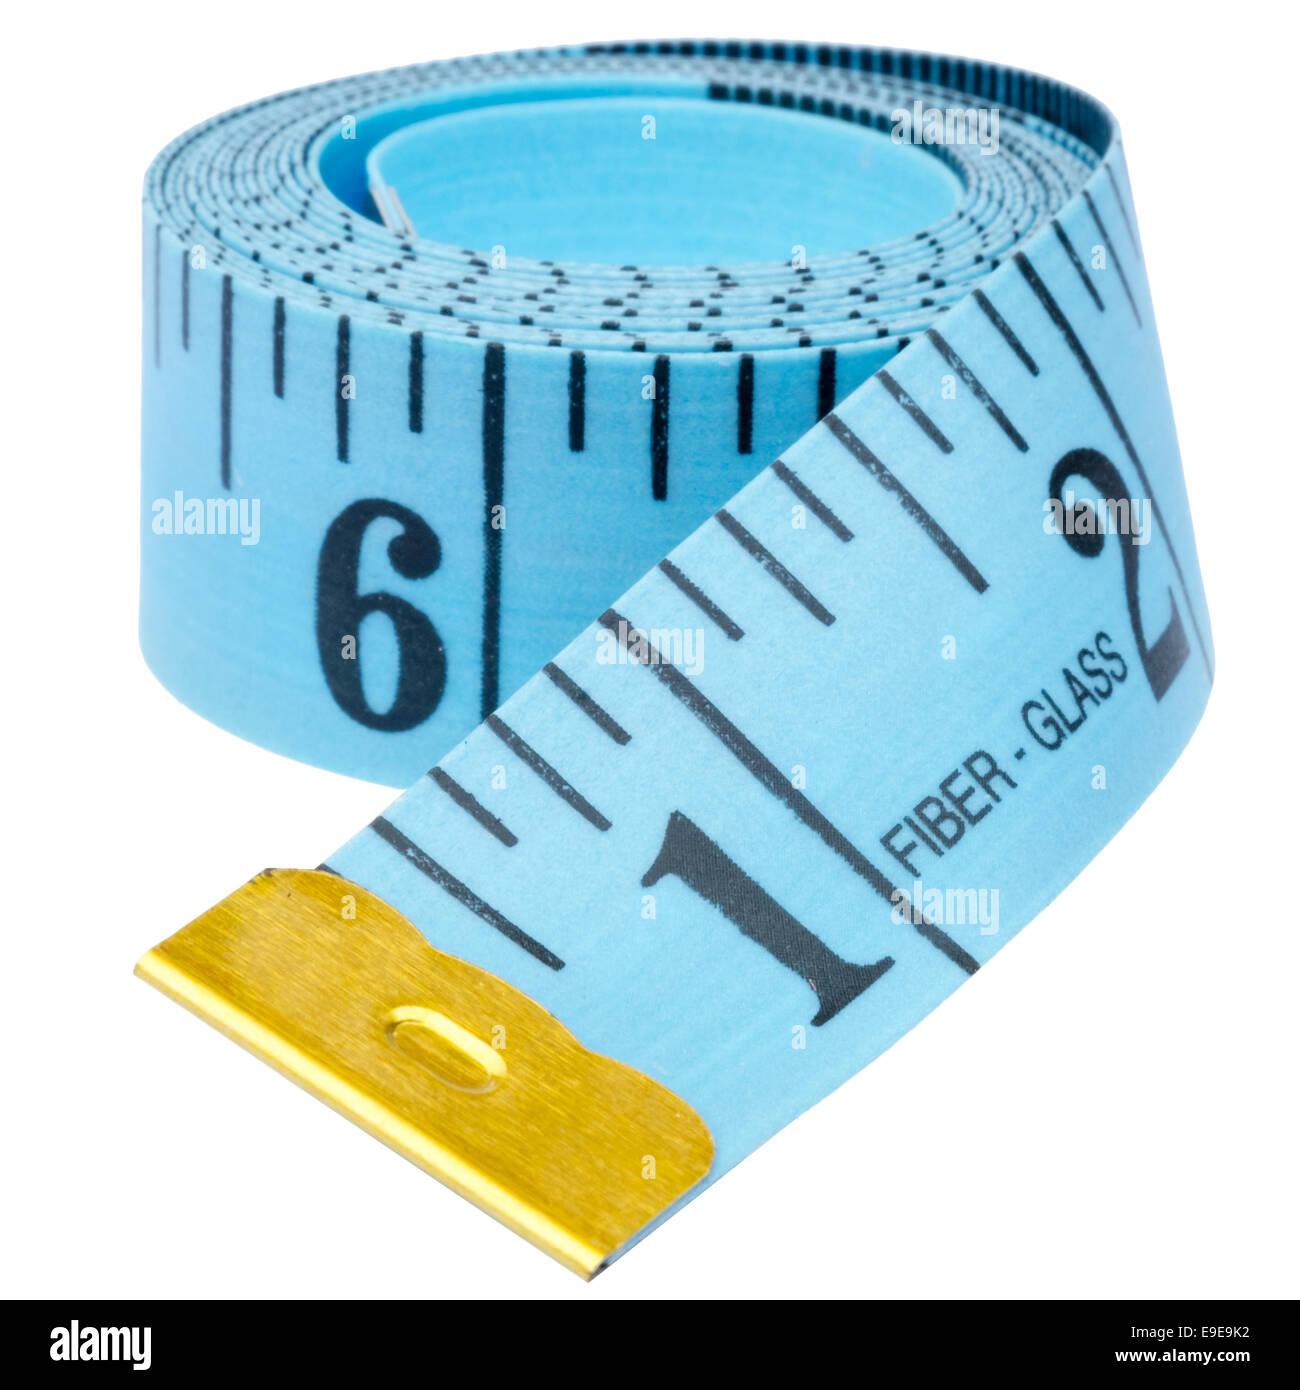 Imperial tailors tape measure, cut out or isolated against a white background. Stock Photo